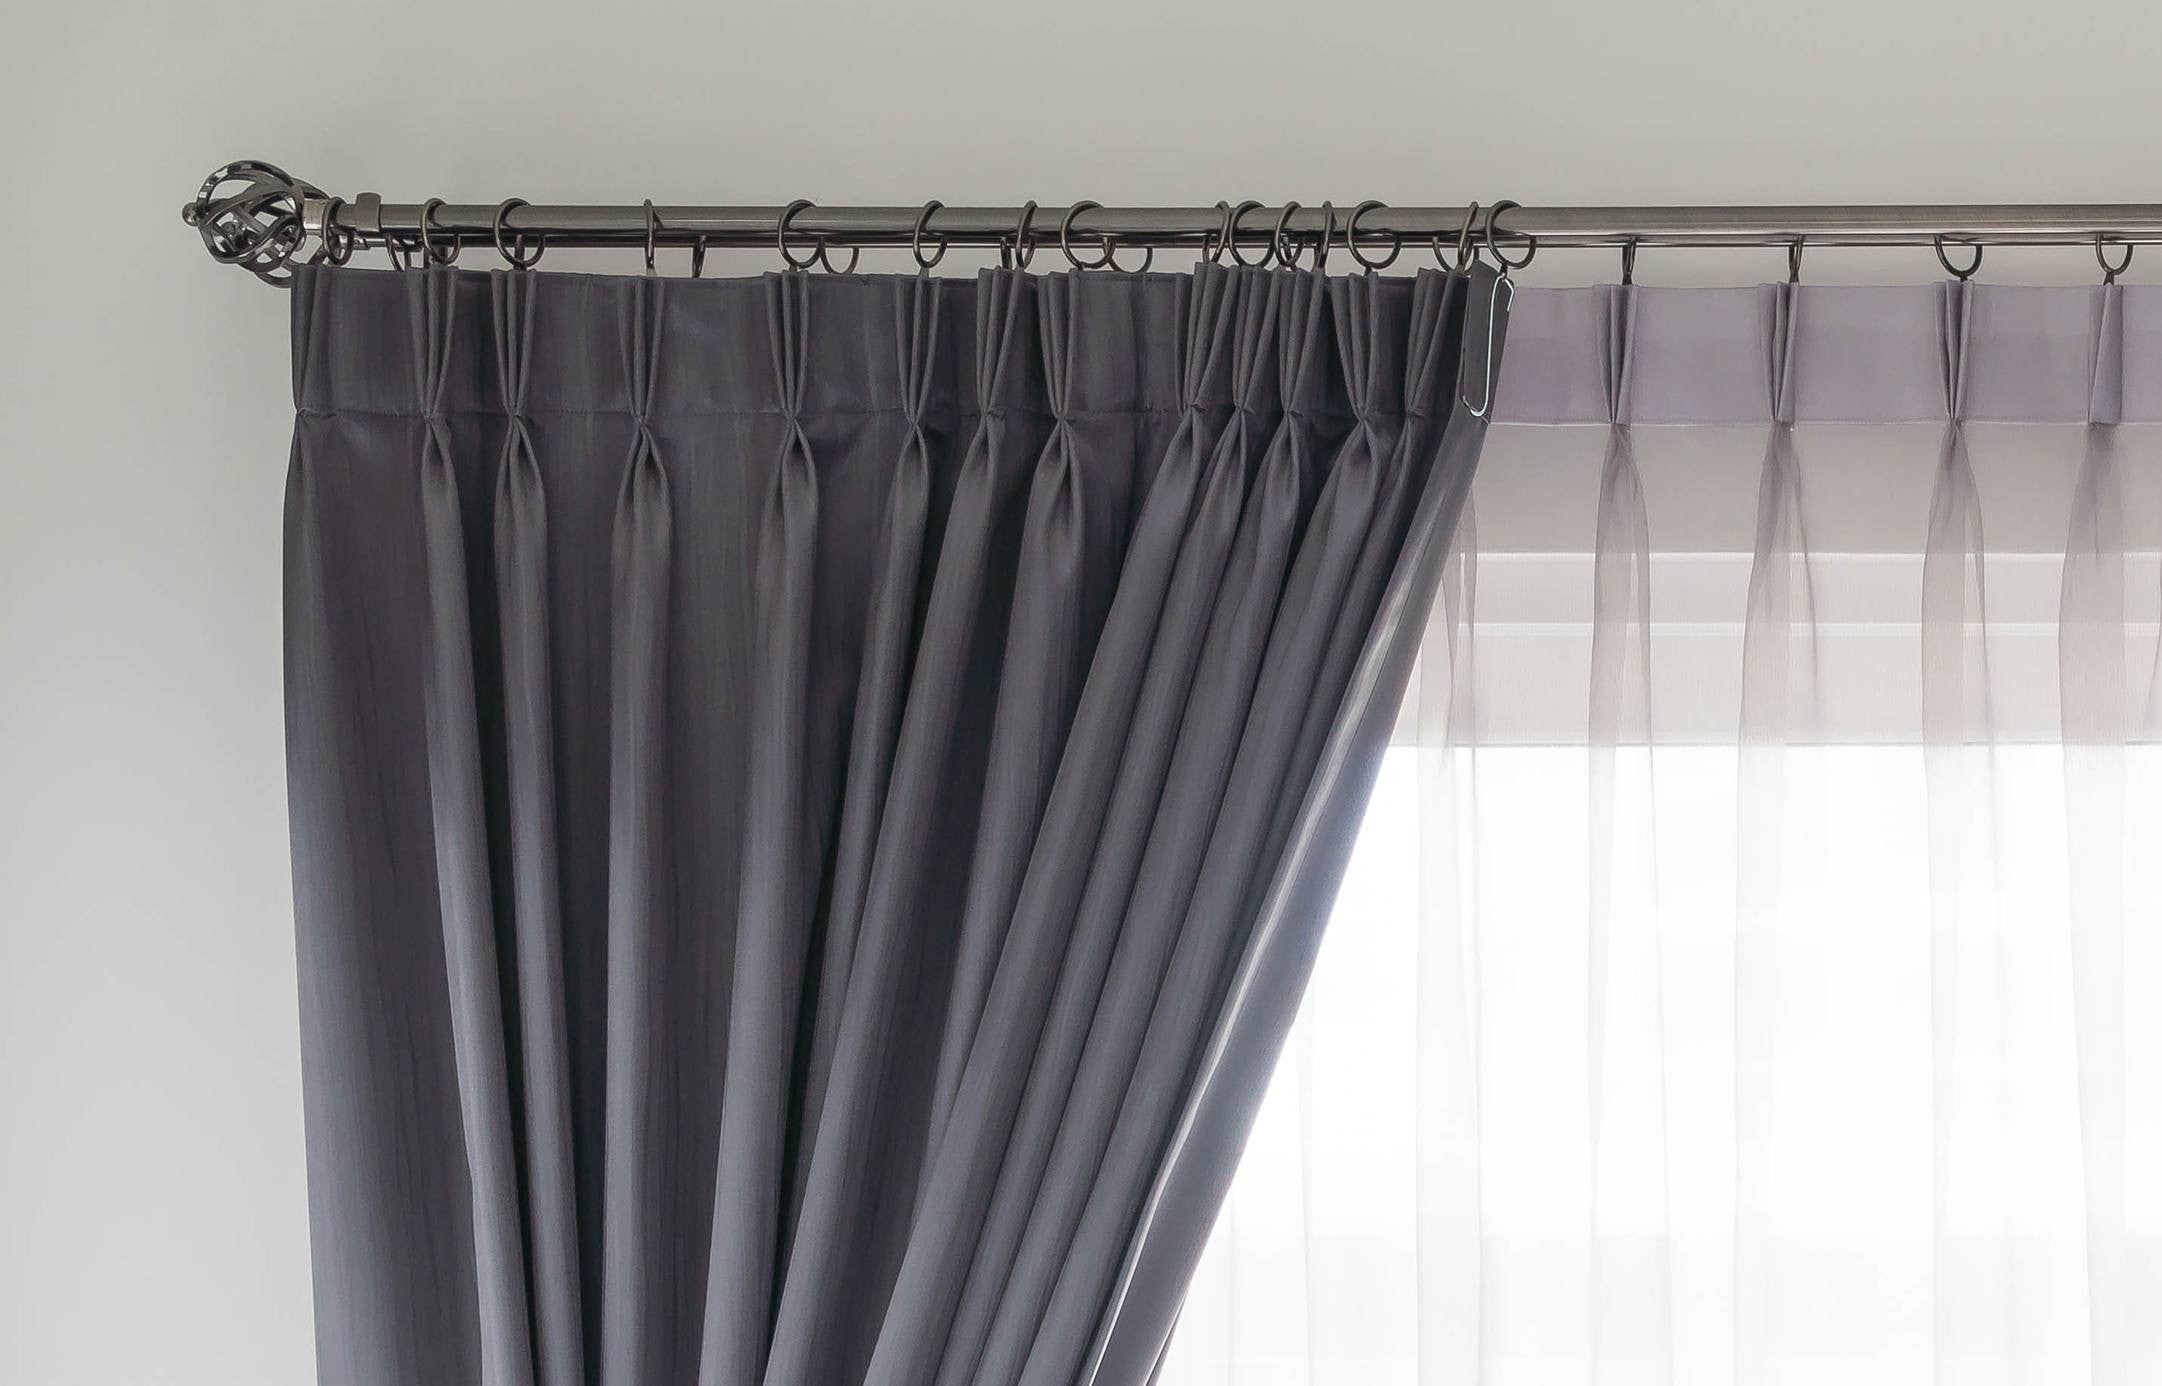 ESTEX DINA 4 curtains & 2 tulle panels purple/silver poly Bronze eyelets  rings | Satin curtains, Purple curtains, Drapes curtains